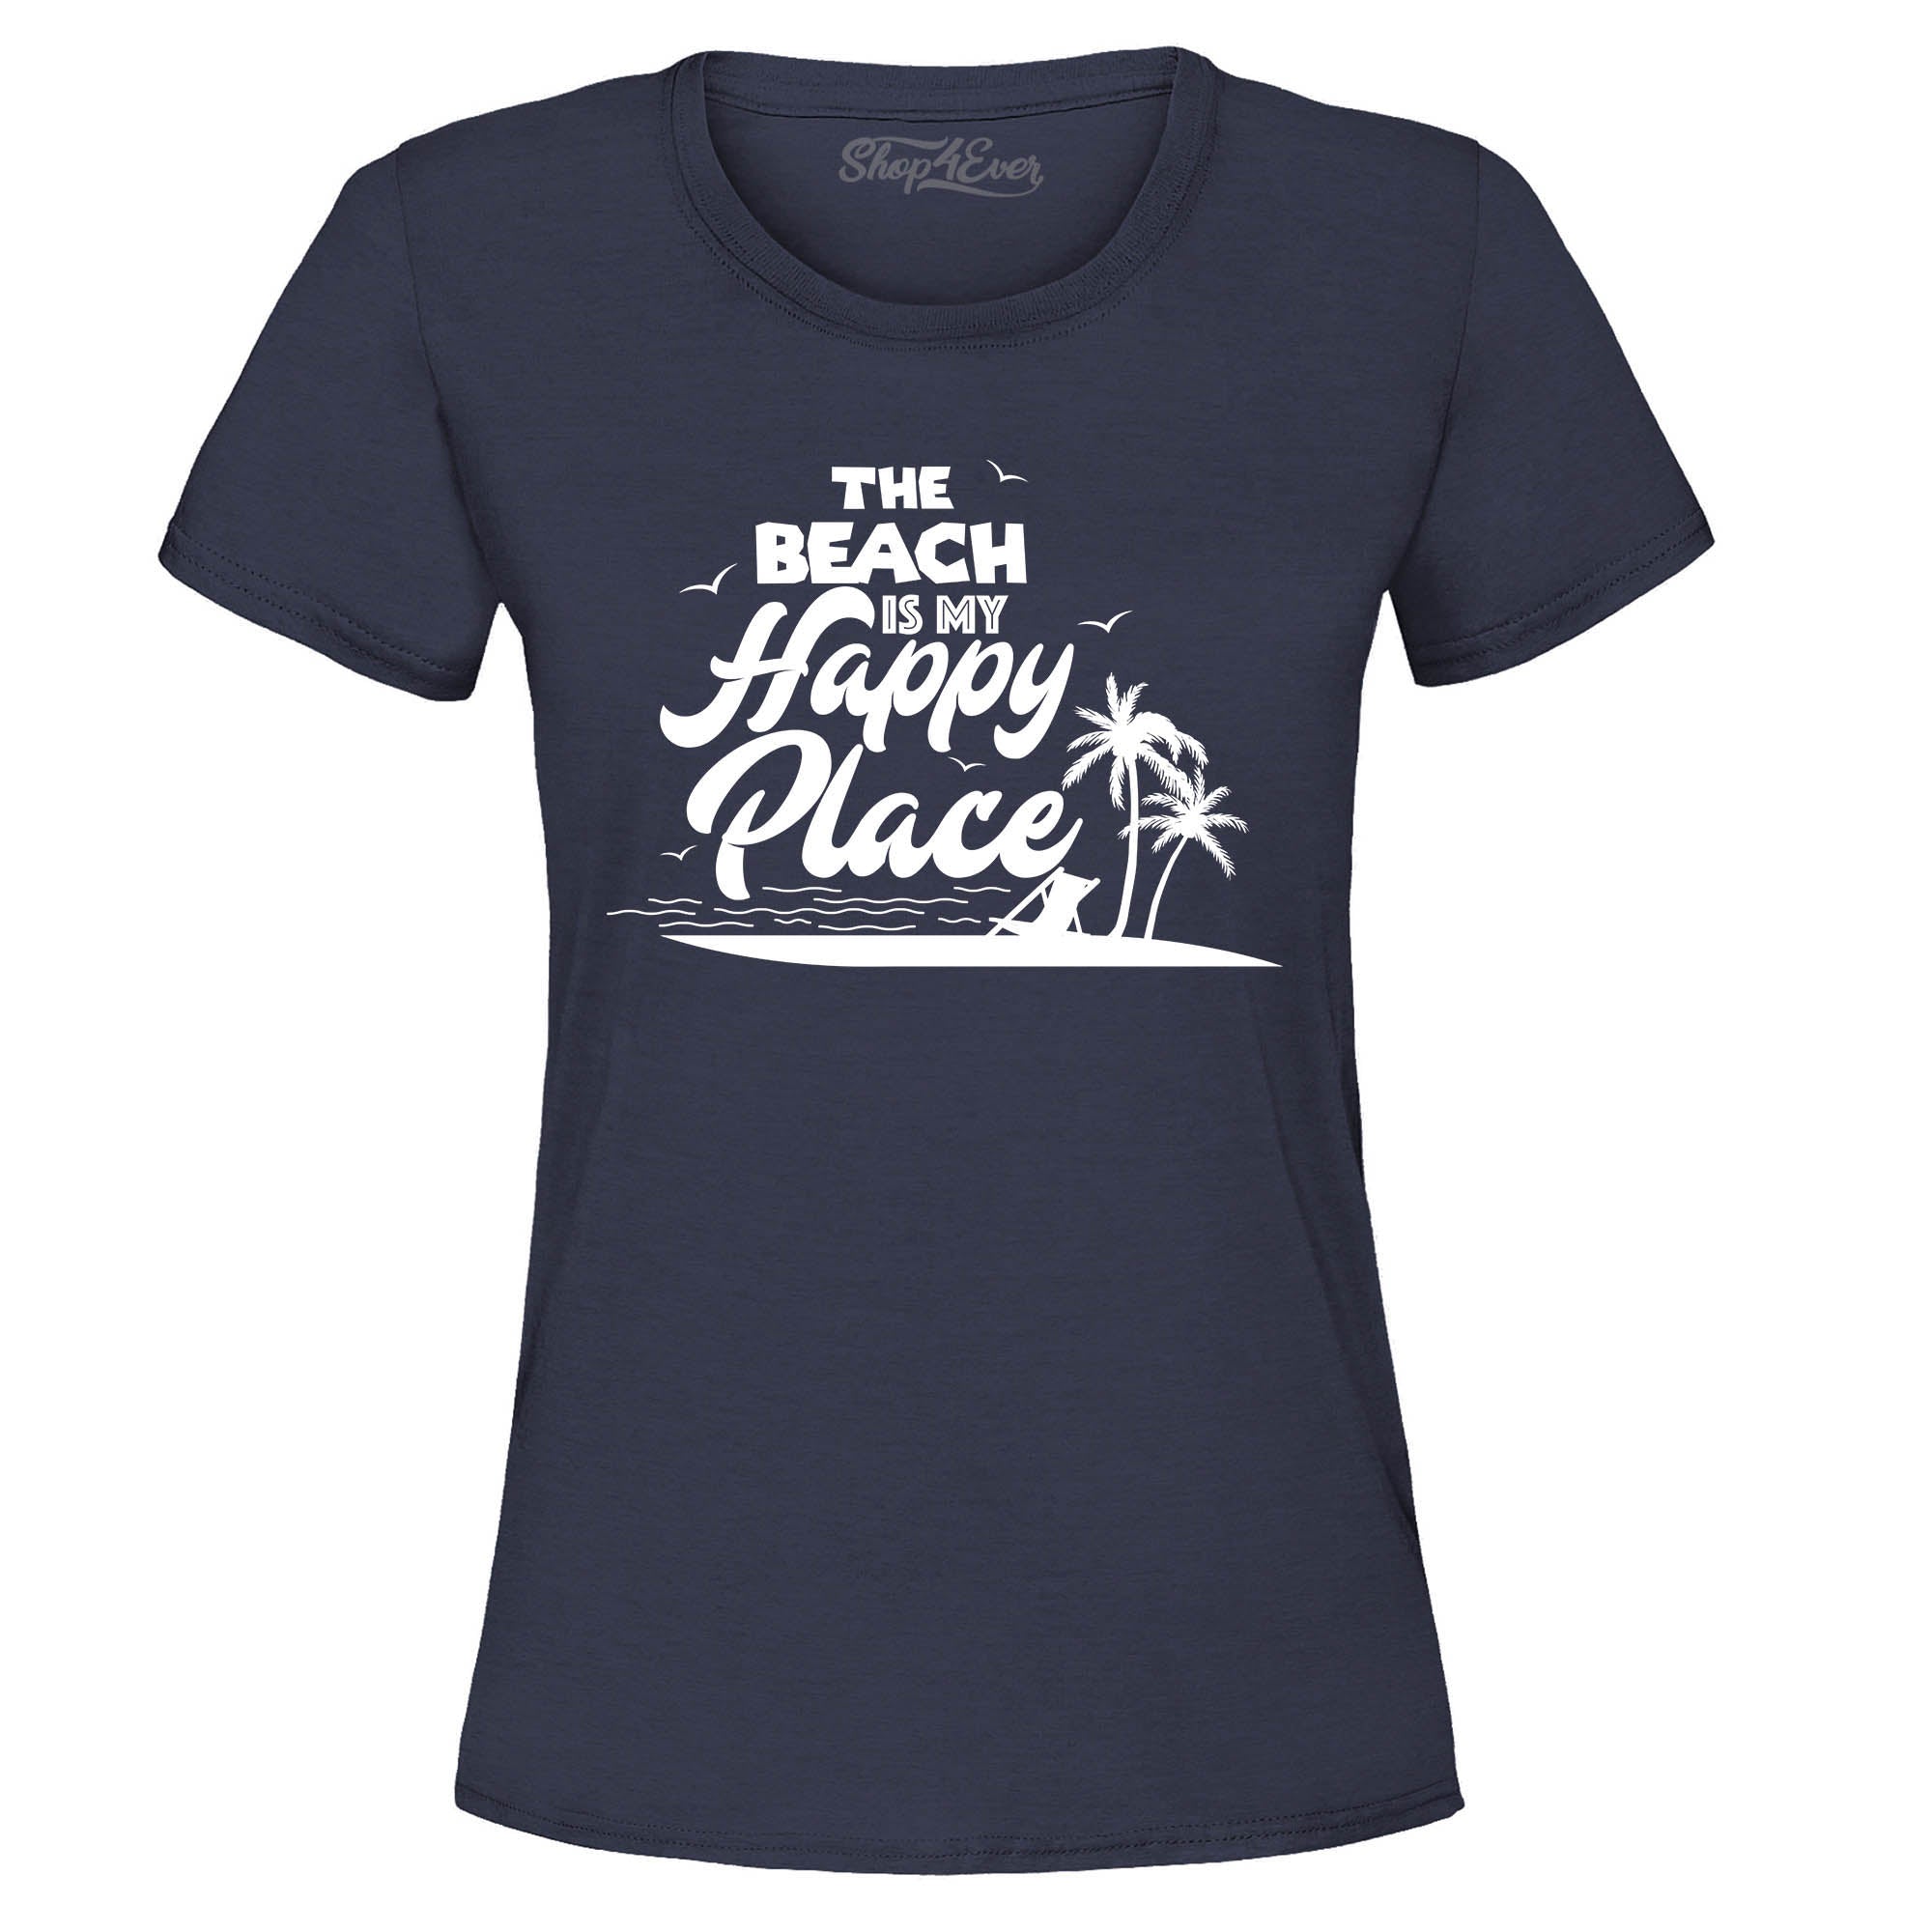 The Beach is My Happy Place Women's T-Shirt